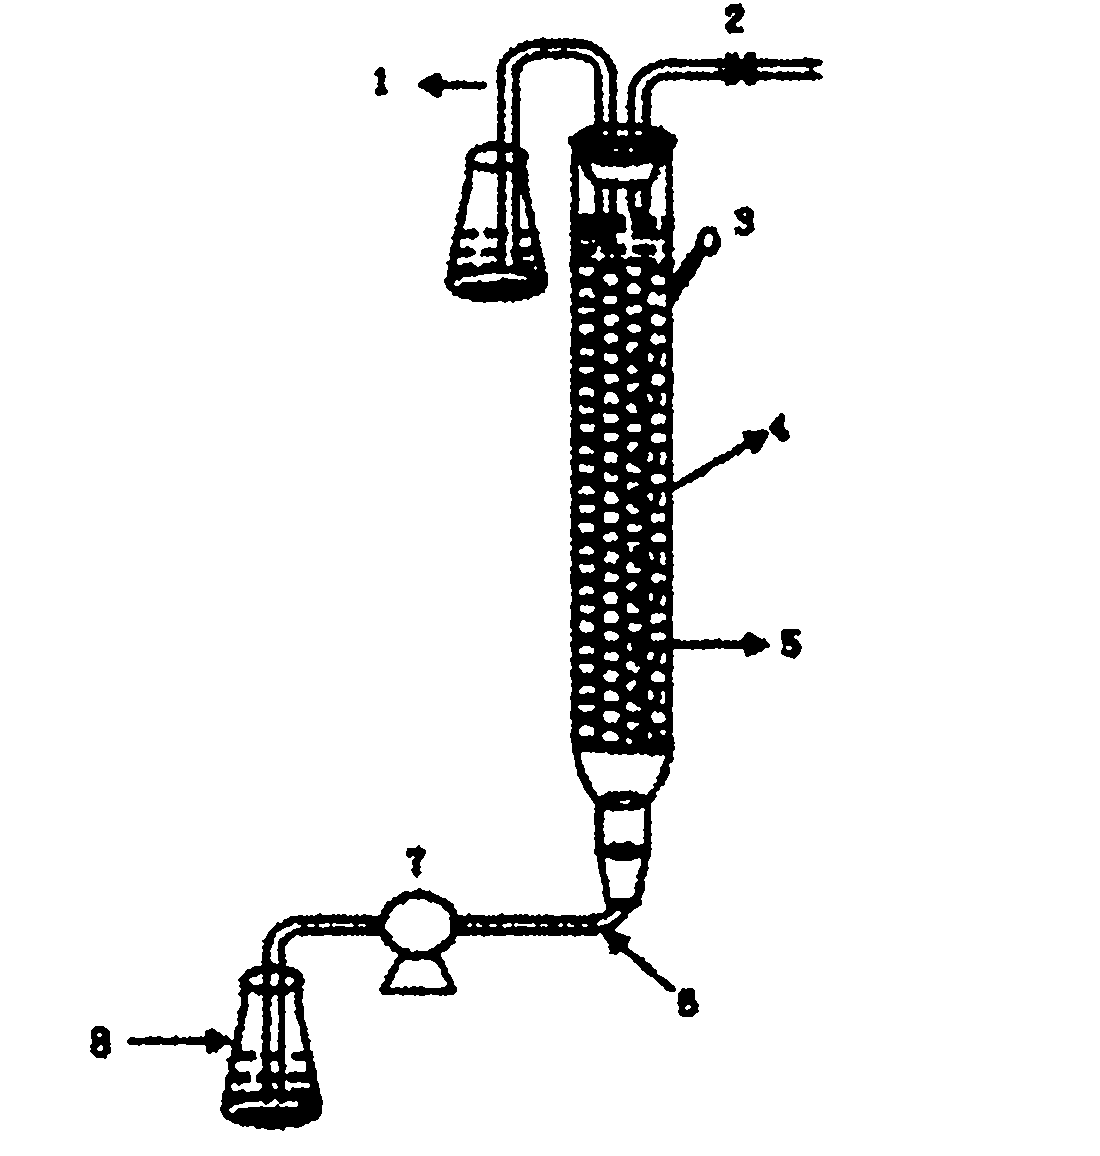 Method for recovering nickel and magnesium elements from high-magnesium low-grade nickel sulfide ore